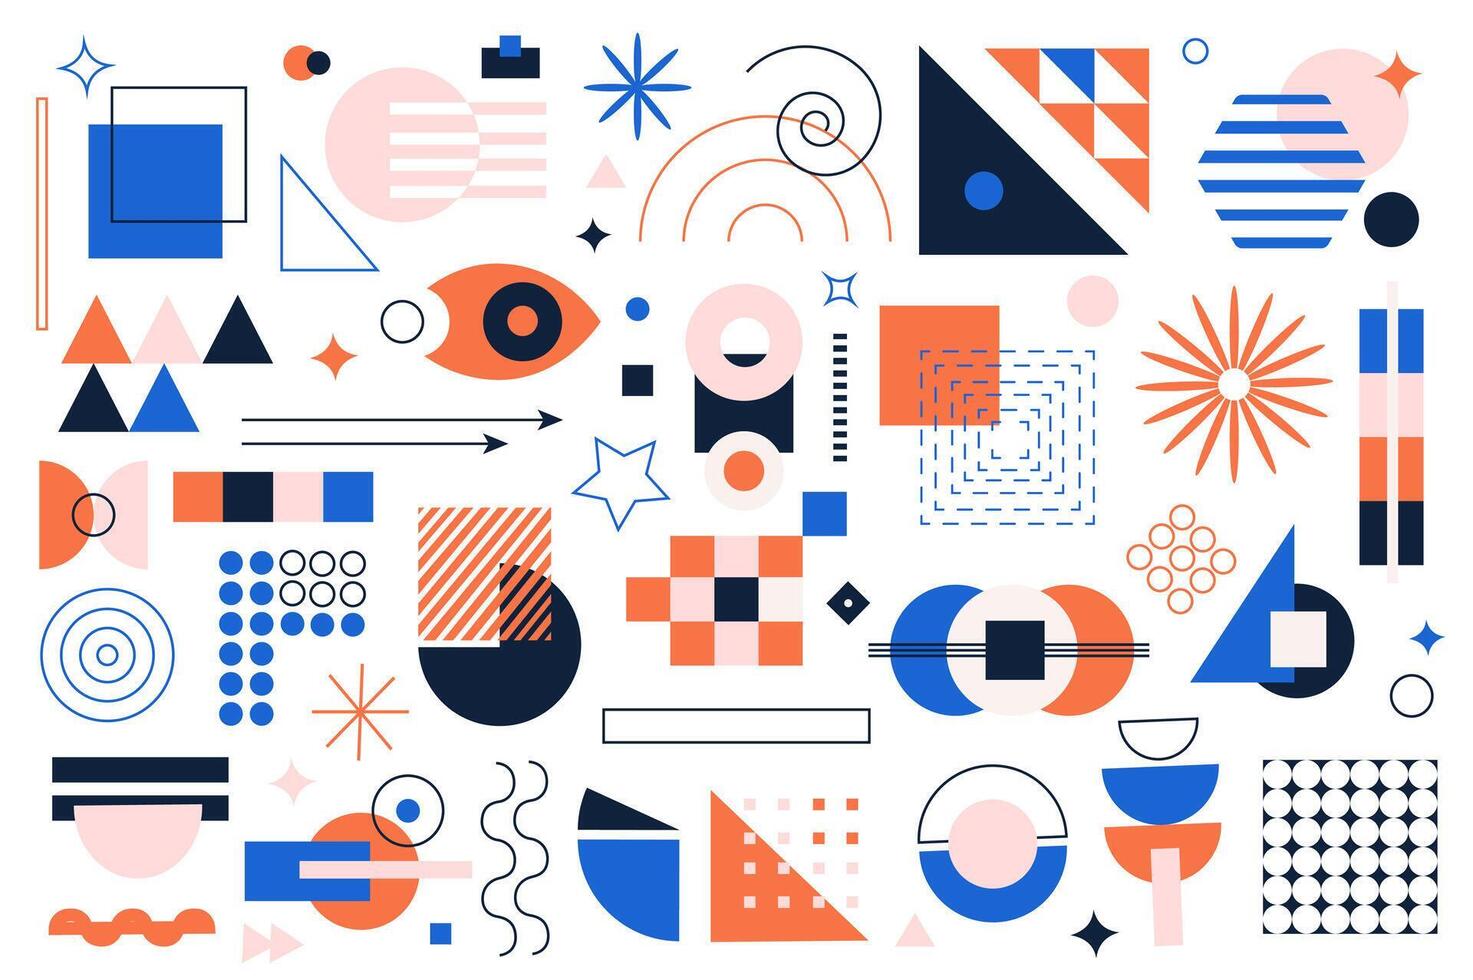 Geometric shapes mega set graphic elements in flat design. Bundle of squares, curl lines, circles, stars, triangles, arrows and other simple forms and composition. Vector illustration isolated objects